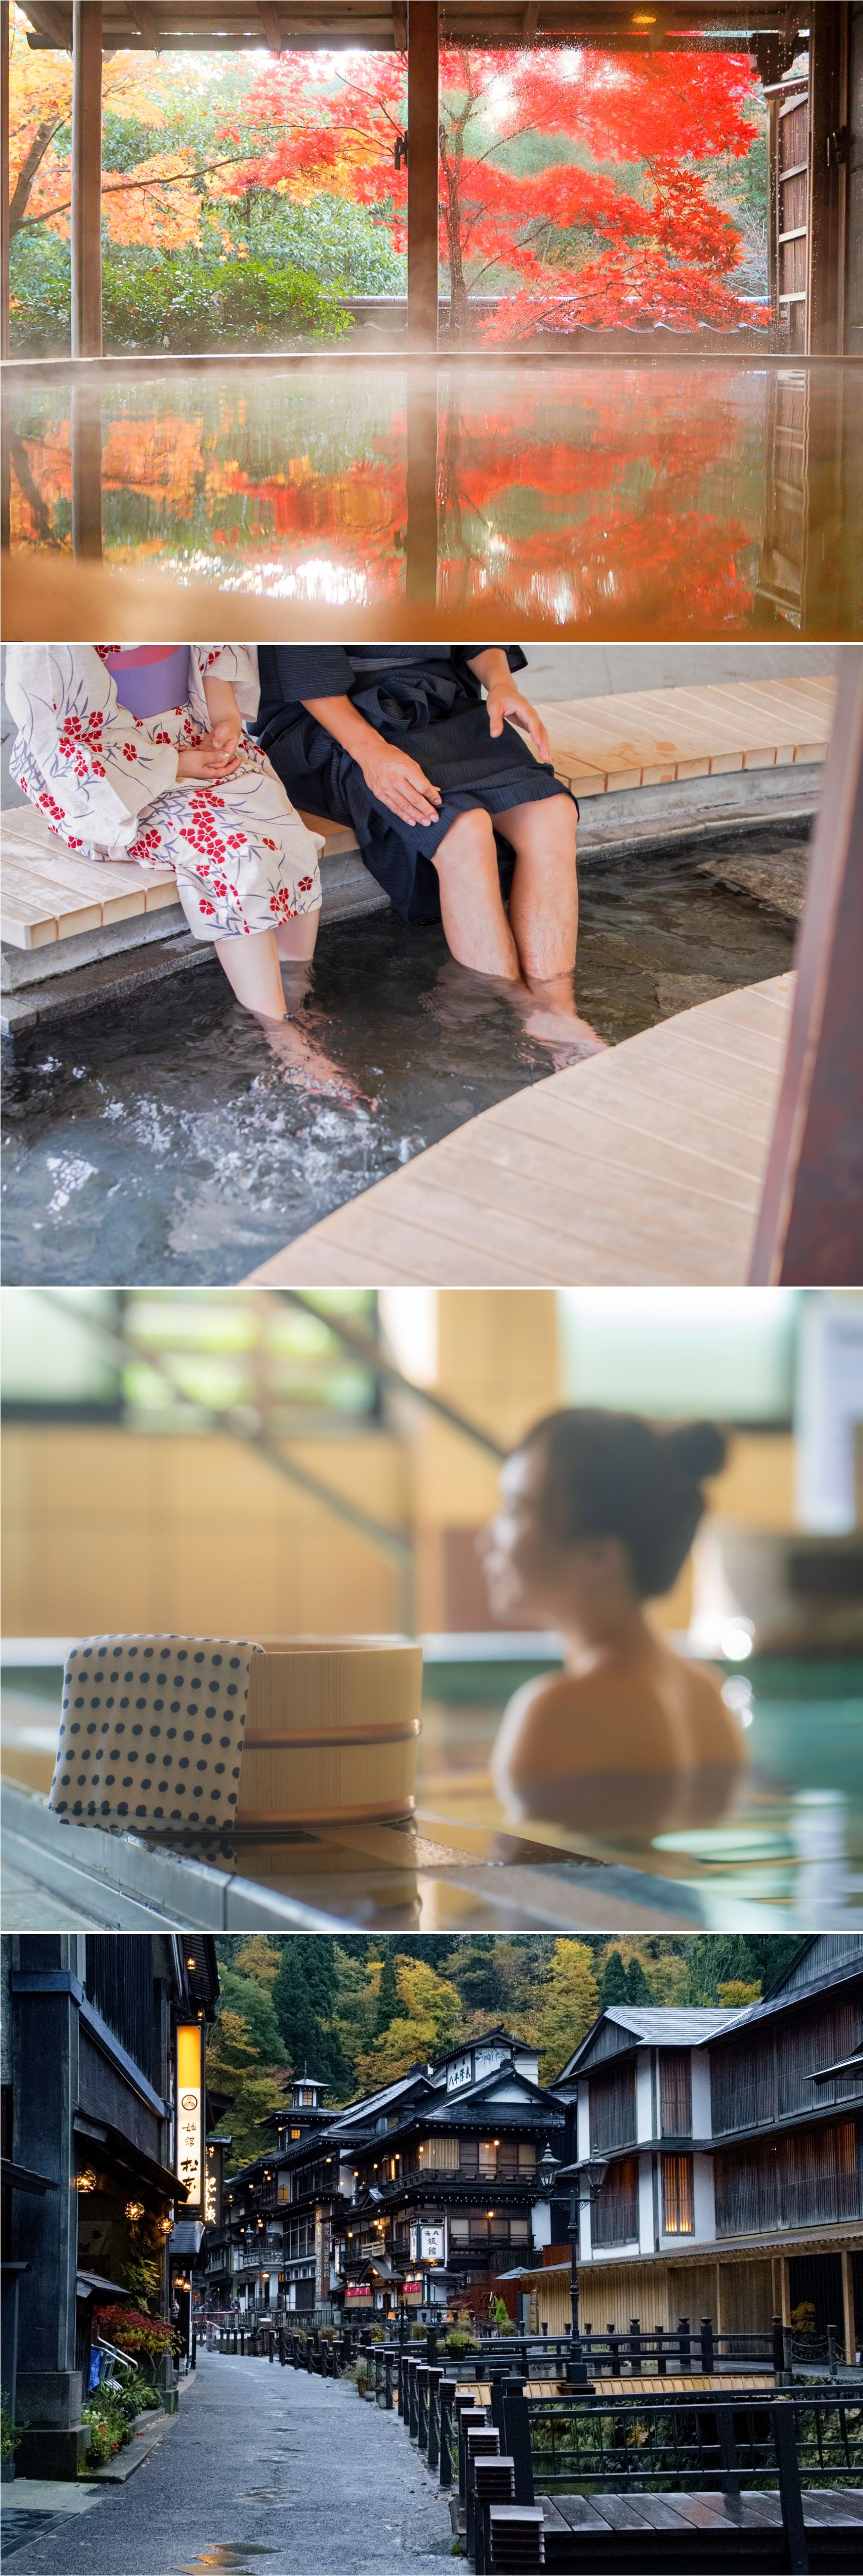 How to Enjoy Hot Springs?